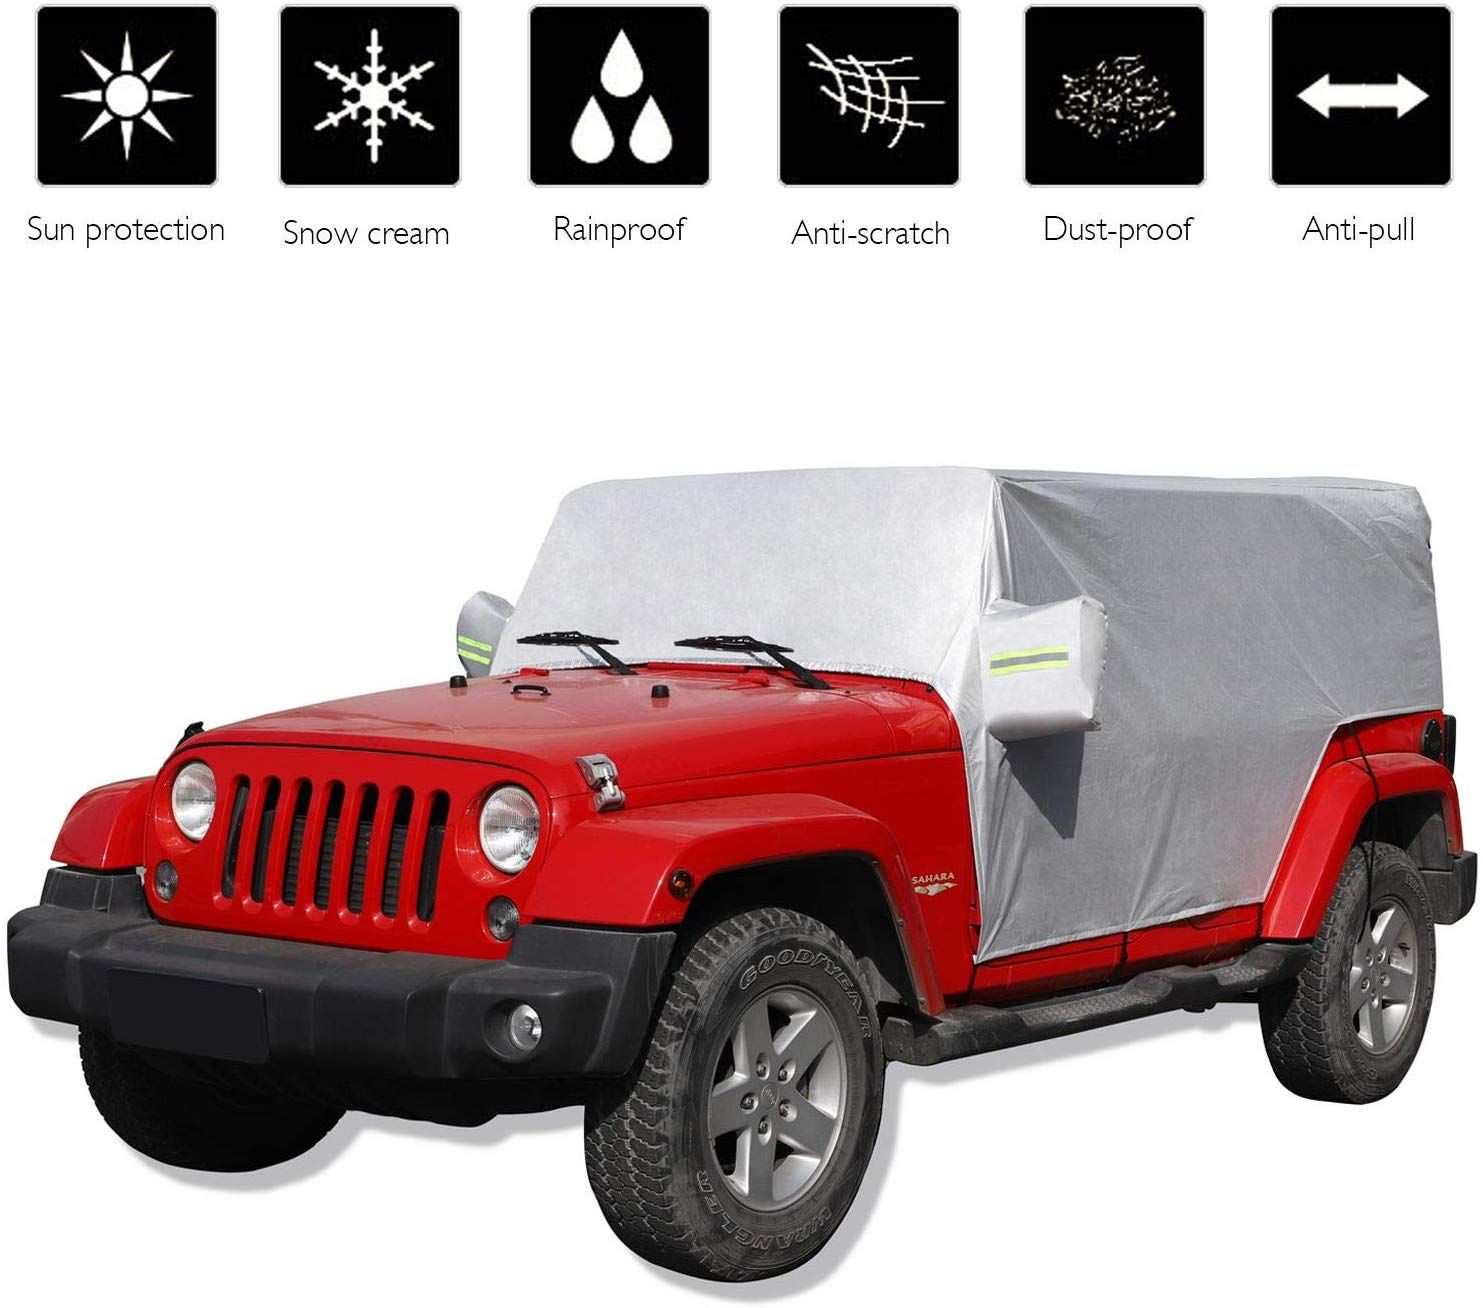 6 Layers Custom-Fit Outdoor Full Car Covers with Zipper Door for Snow Rain Dust Hail Protection 2 Door, Black Car Covers Waterproof All Weather Replace for Jeep Wrangler 2 Doors 2007-2021